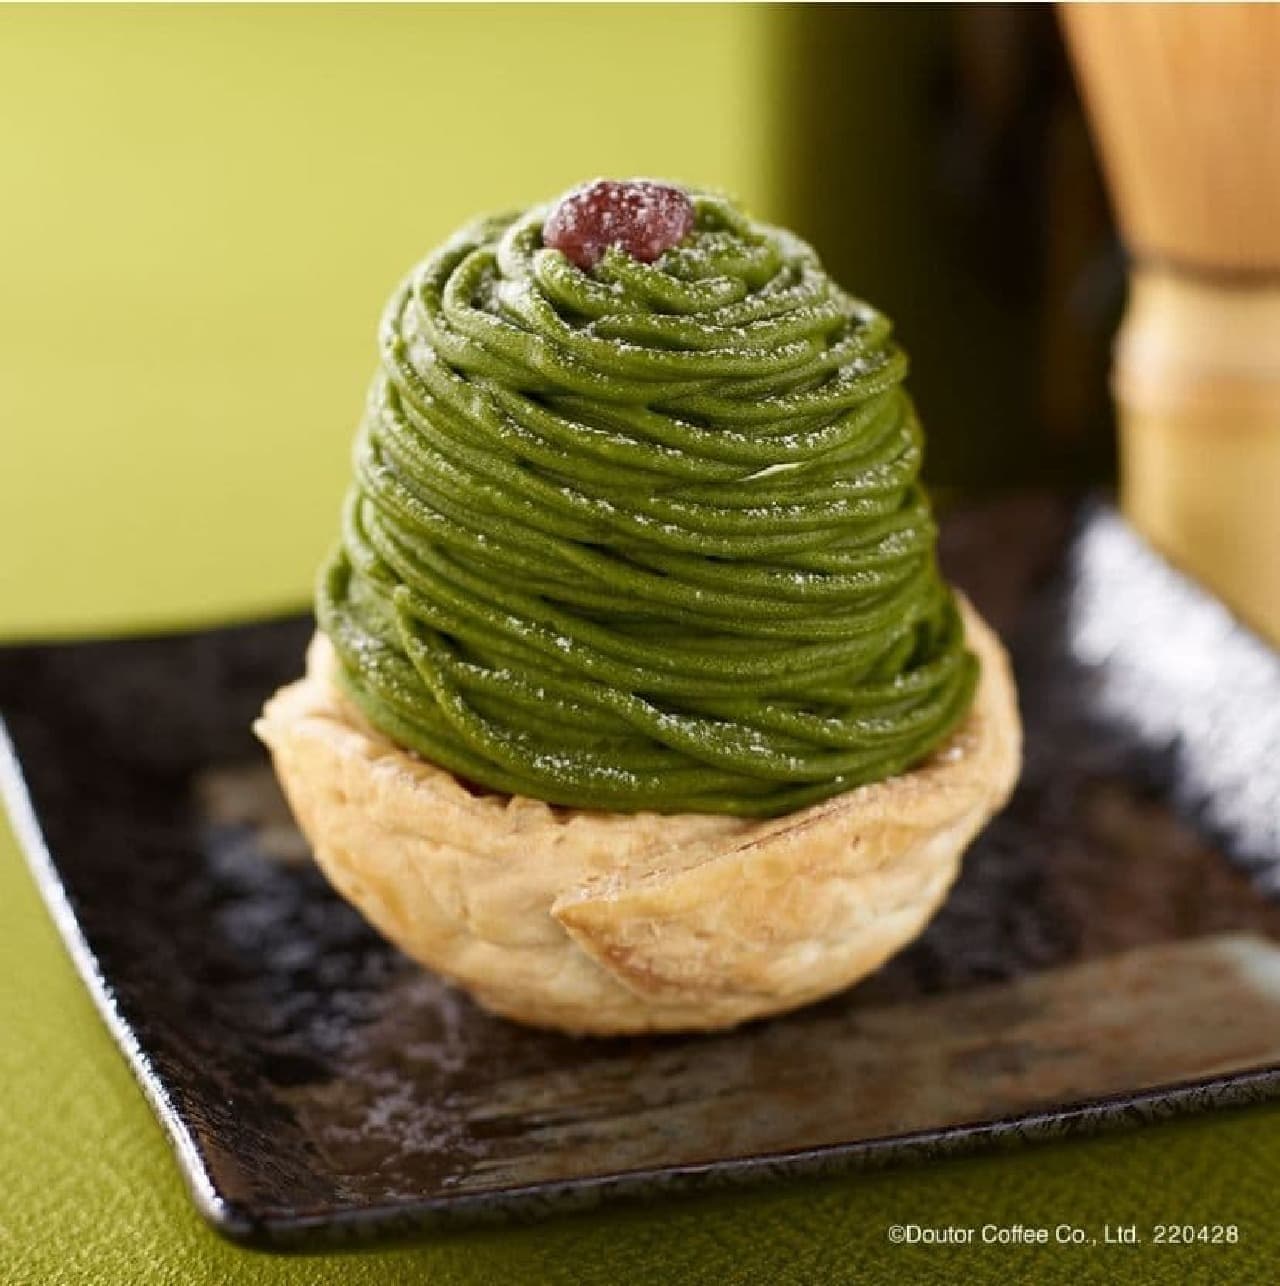 Doutor "Mont Blanc with Uji Green Tea from Kyoto Prefecture